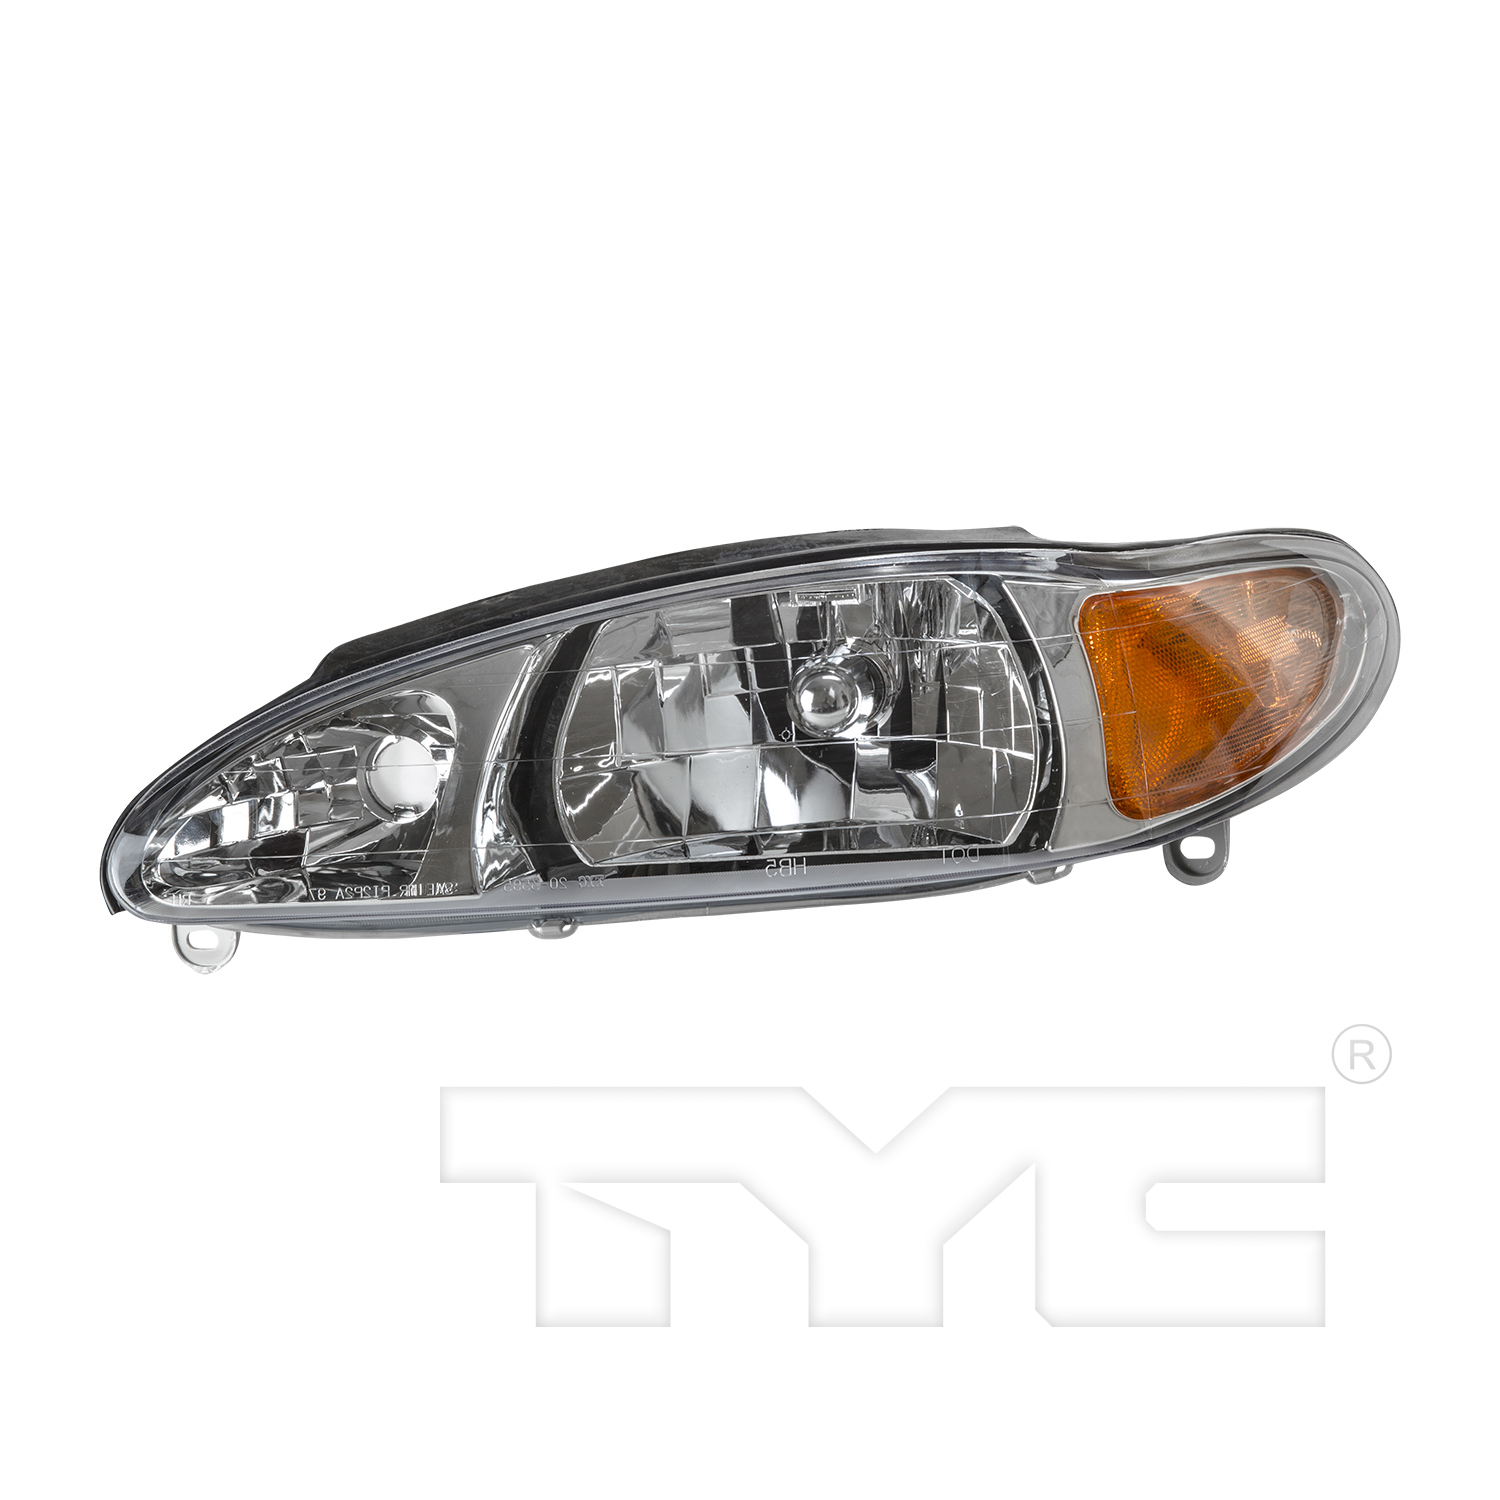 Aftermarket HEADLIGHTS for MERCURY - TRACER, TRACER,97-99,LT Headlamp assy composite